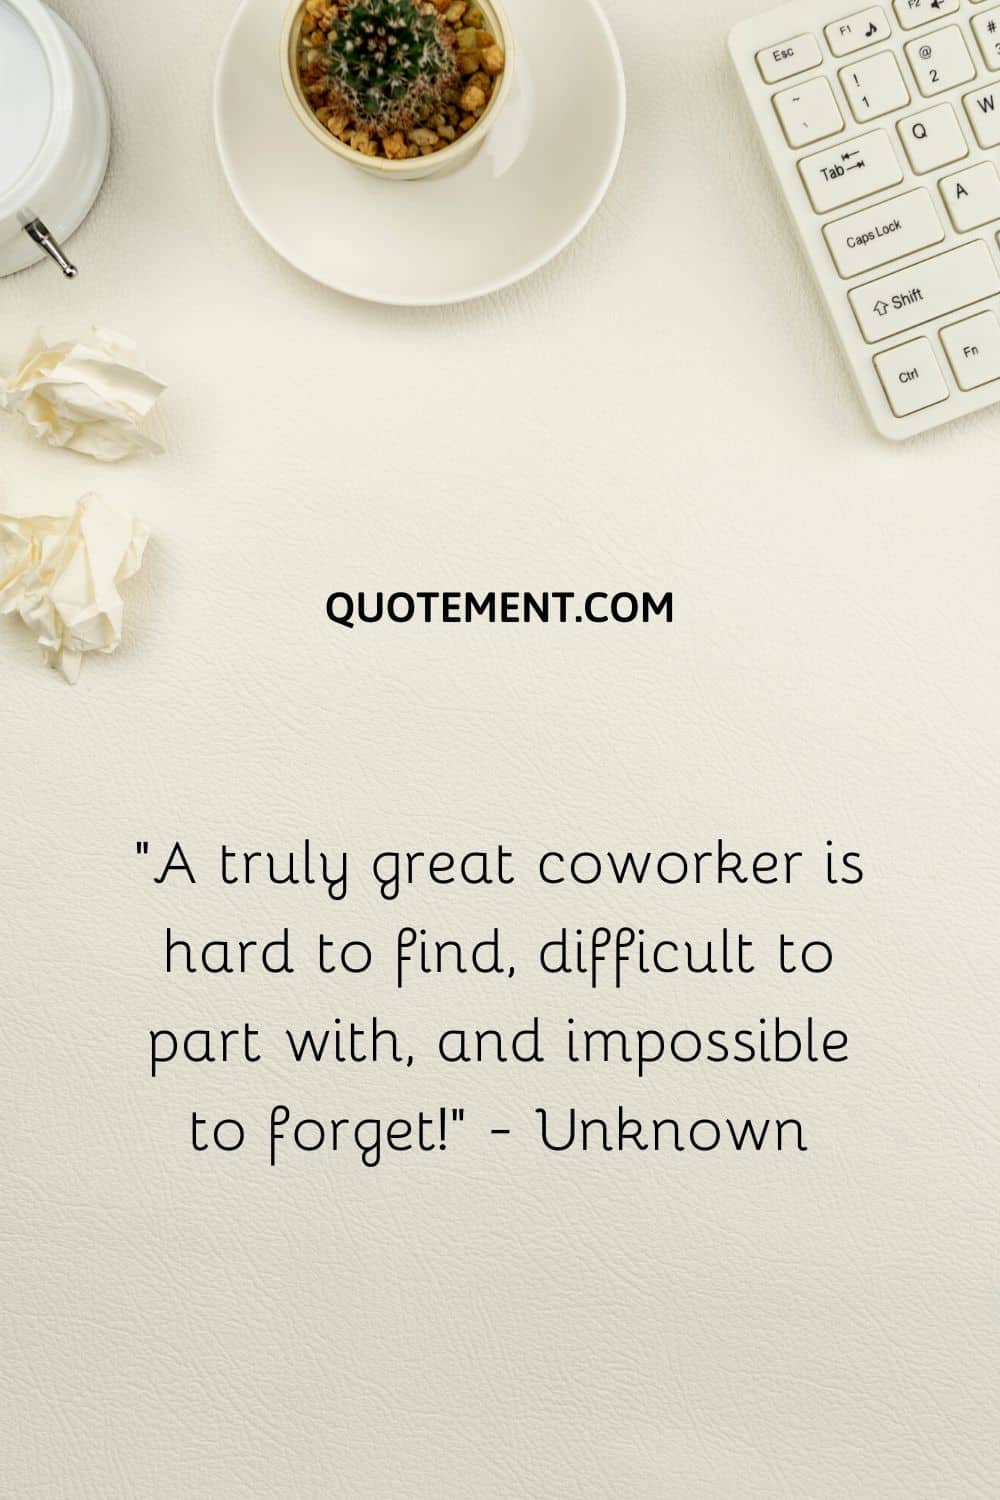 “A truly great coworker is hard to find, difficult to part with, and impossible to forget!” - Unknown